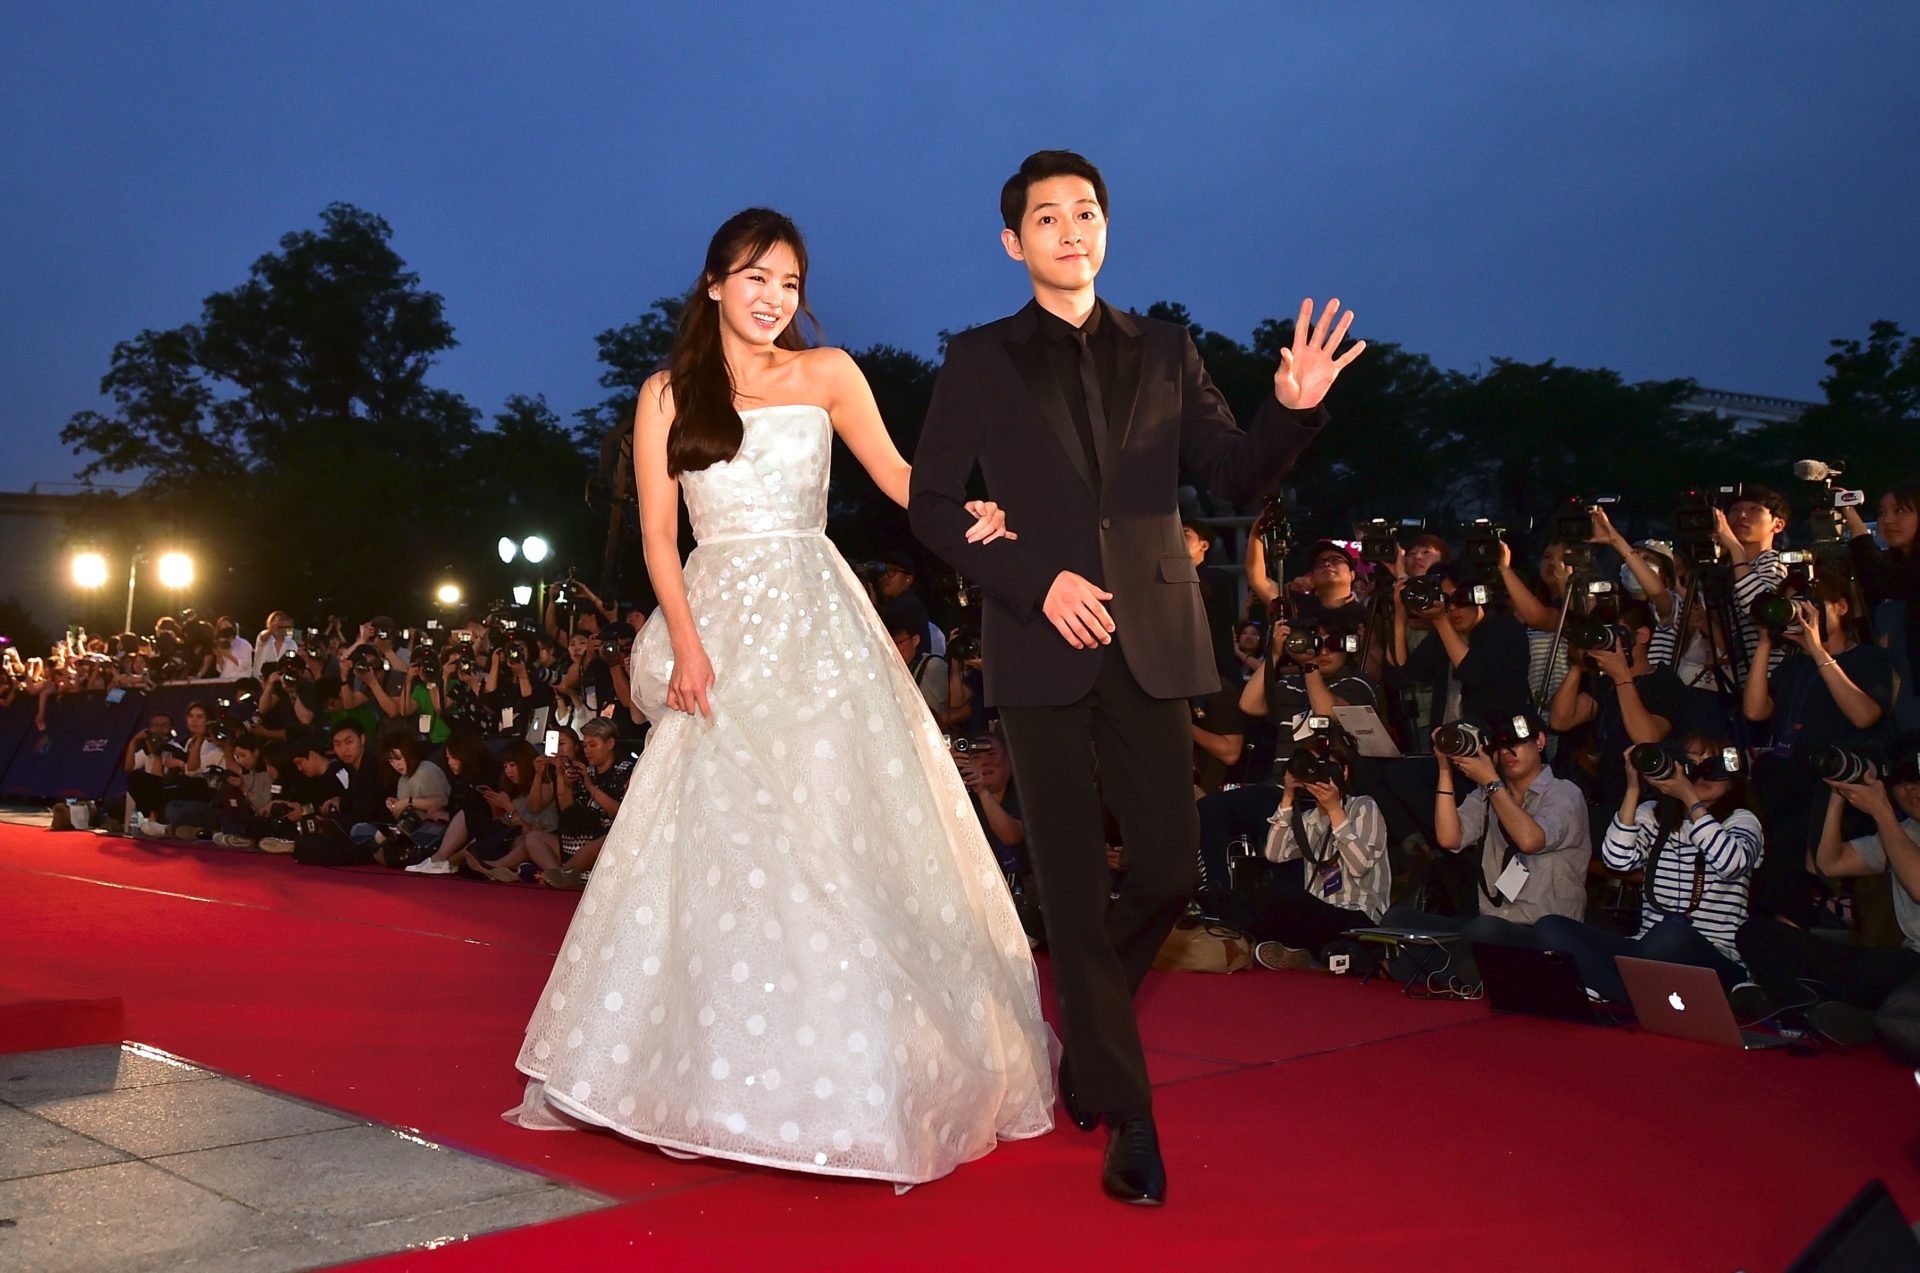 Shocking Update: Song Joong-ki and Song Hye-kyo Relationship Status Revealed - Are They Still Together? 15